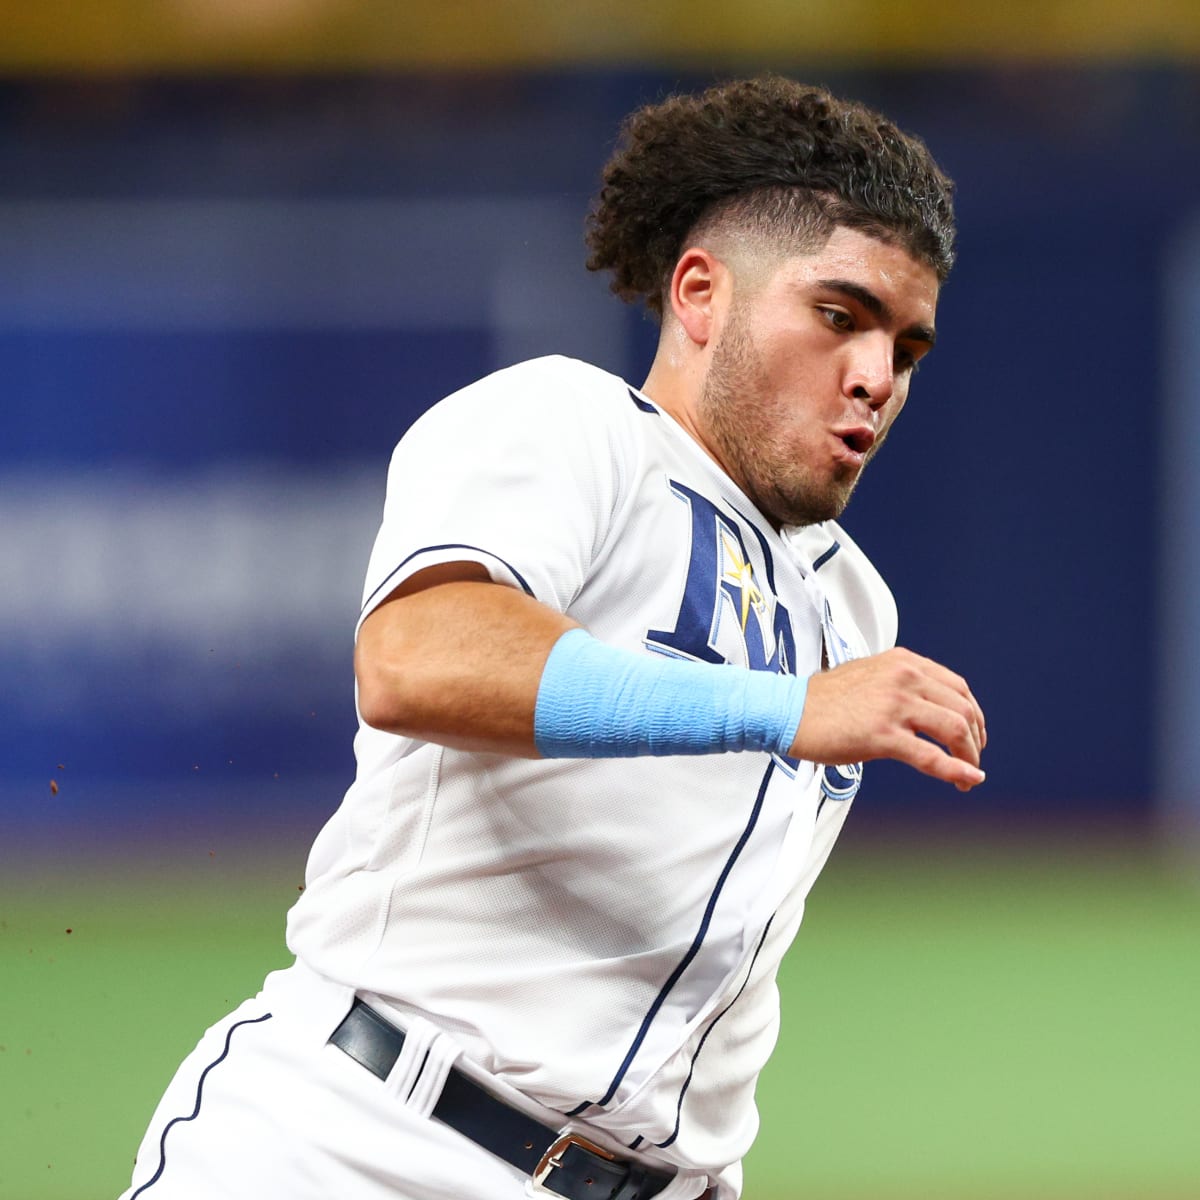 Tampa Bay Rays 2020 Top 10 Prospects - Last Word On Baseball